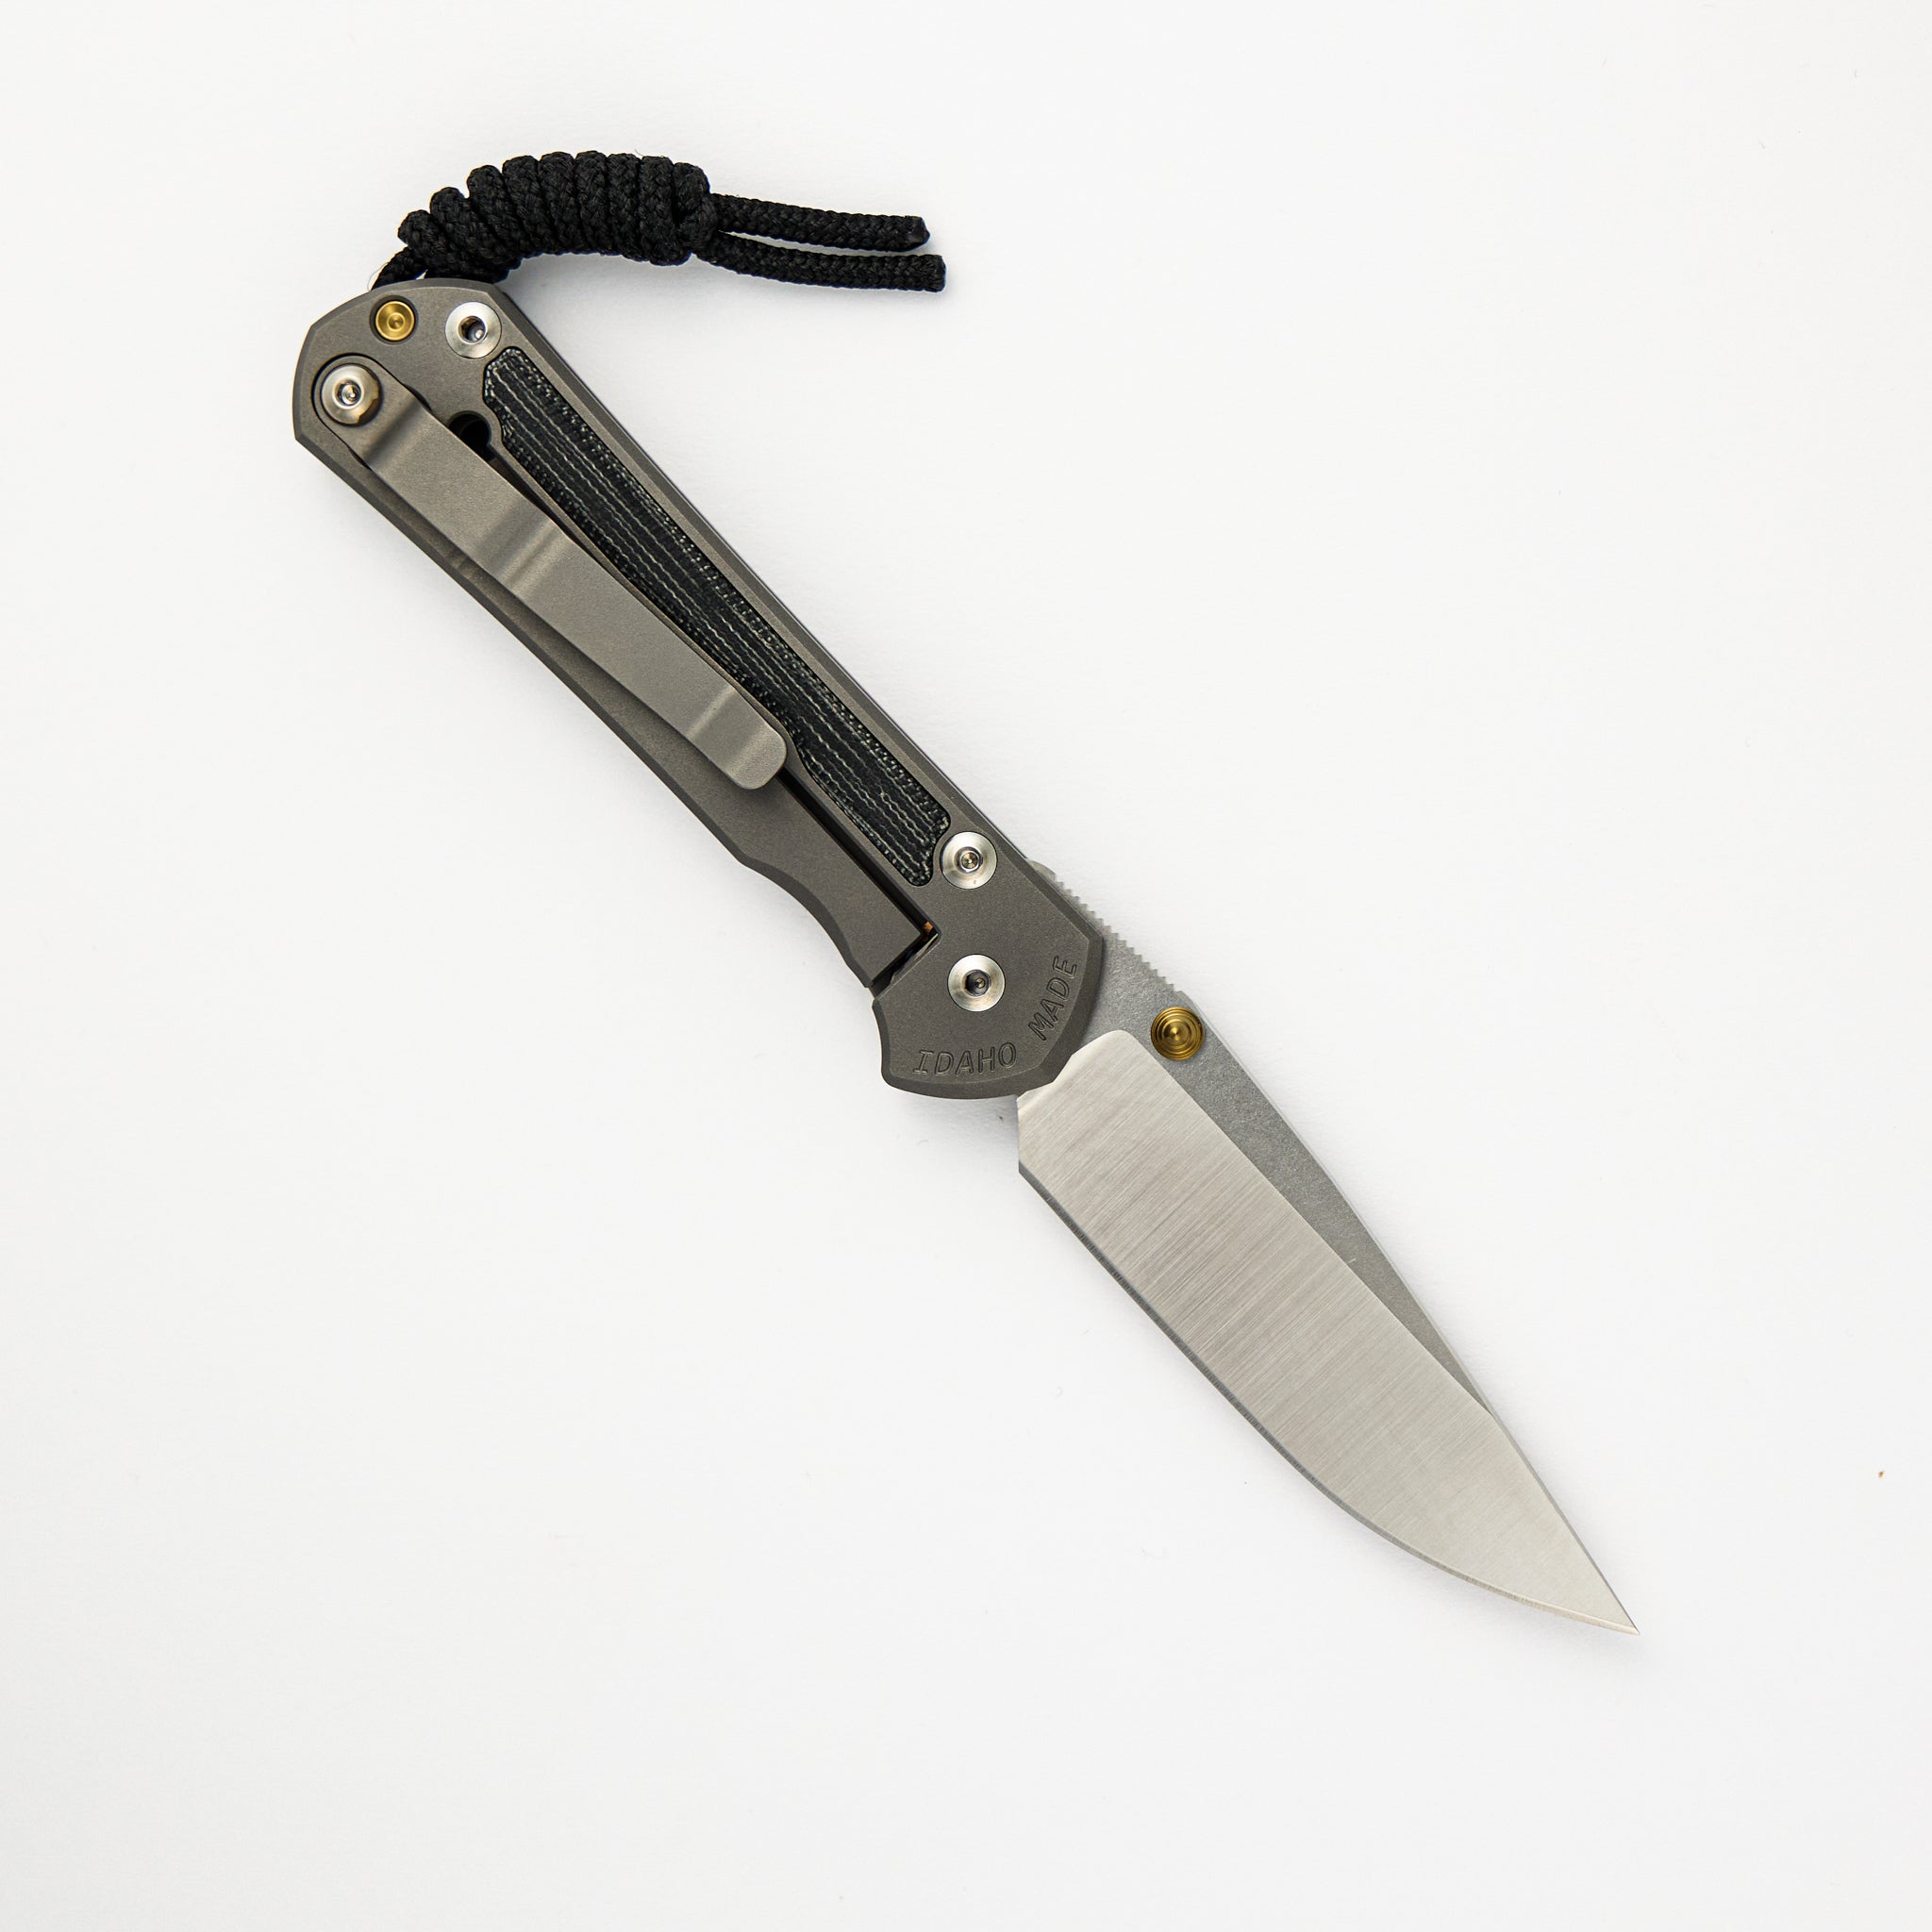 CHRIS REEVE SMALL SEBENZA 31 BLACK CANVAS MICARTA INLAY – POLISHED CPM MAGNACUT BLADE – GLASS BLASTED – GOLD DOUBLE THUMB LUGS